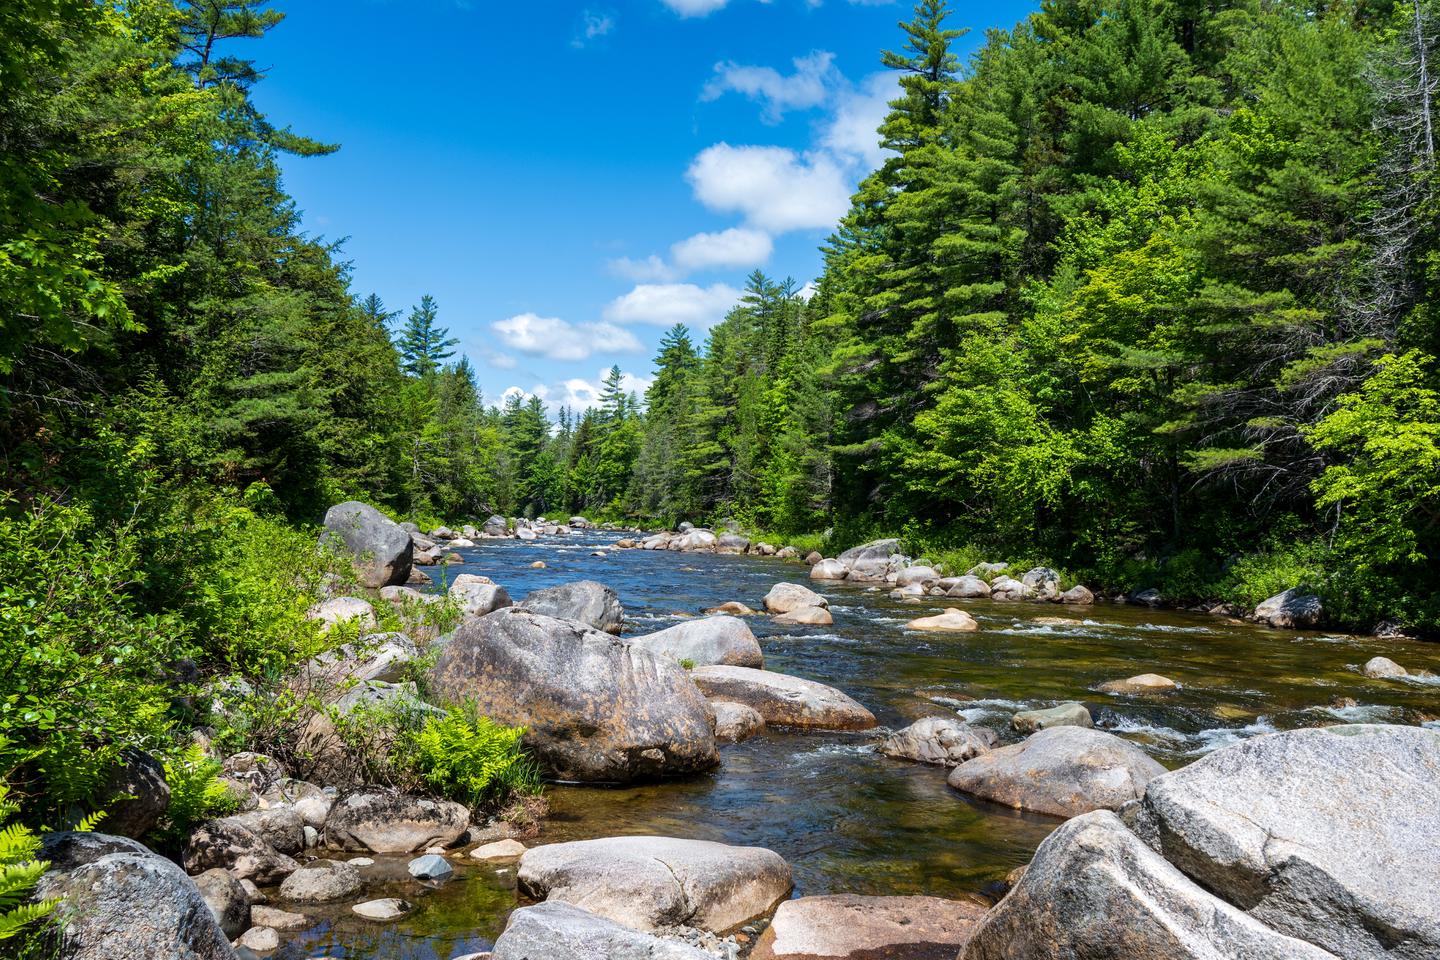 A view of Wassataquoik Stream on a sunny, blue-sky day. Large boulders and rocks are visible in the stream and dense green forest vegetation line both sides of the large stream.View of Wassataquoik Stream from Esker Campsite.